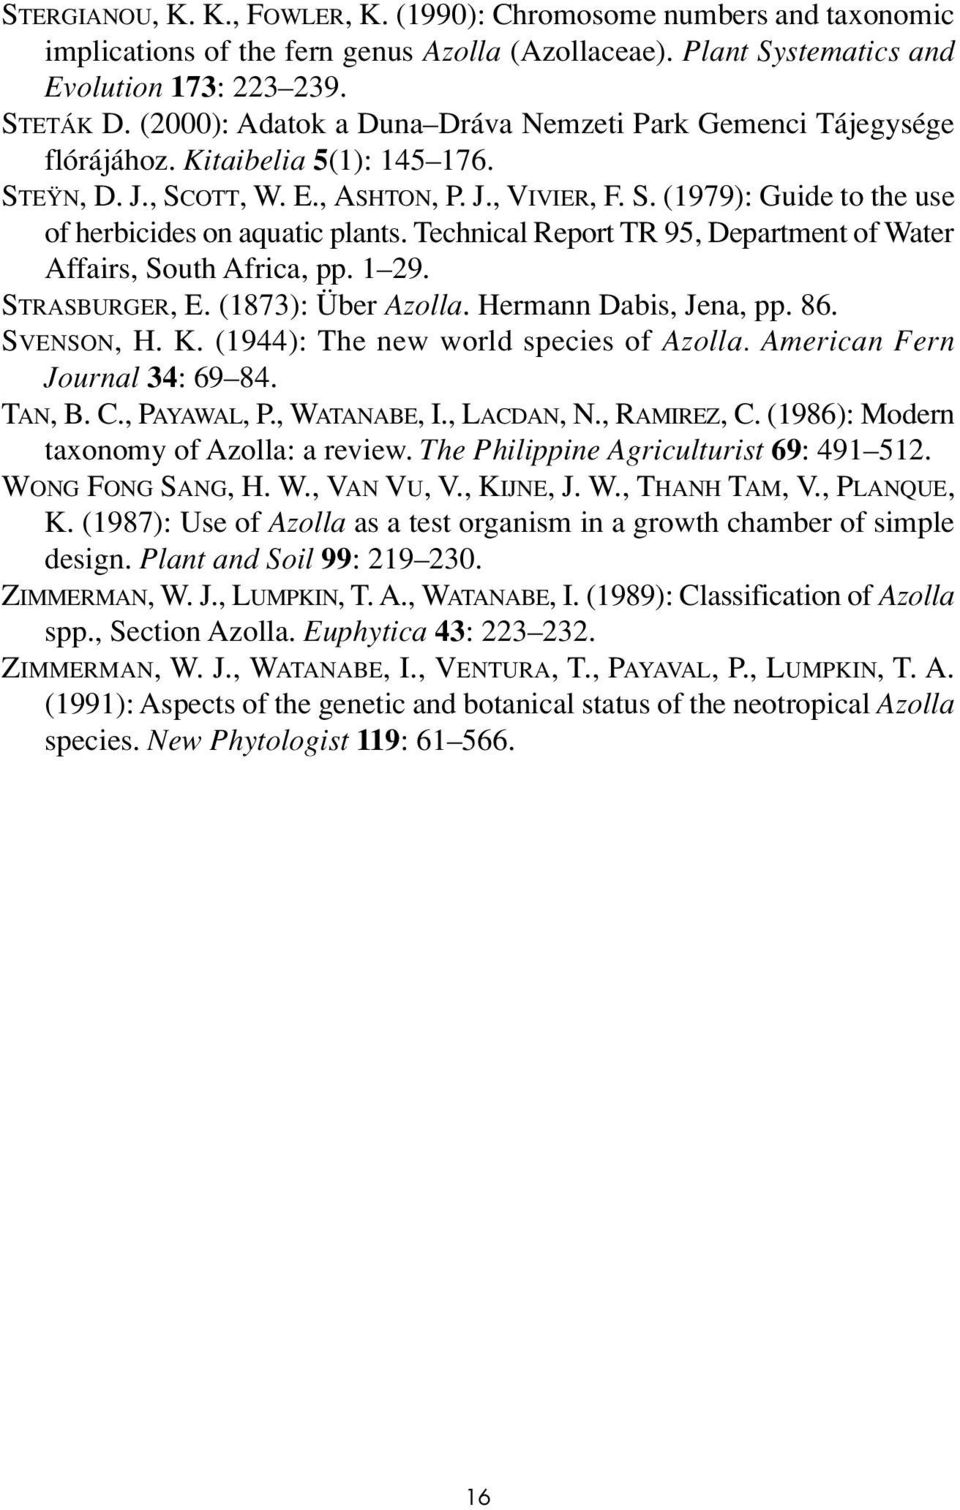 Technical Report TR 95, Department of Water Affairs, South Africa, pp. 1 29. STRASBURGER, E. (1873): Über Azolla. Hermann Dabis, Jena, pp. 86. SVENSON, H. K. (1944): The new world species of Azolla.